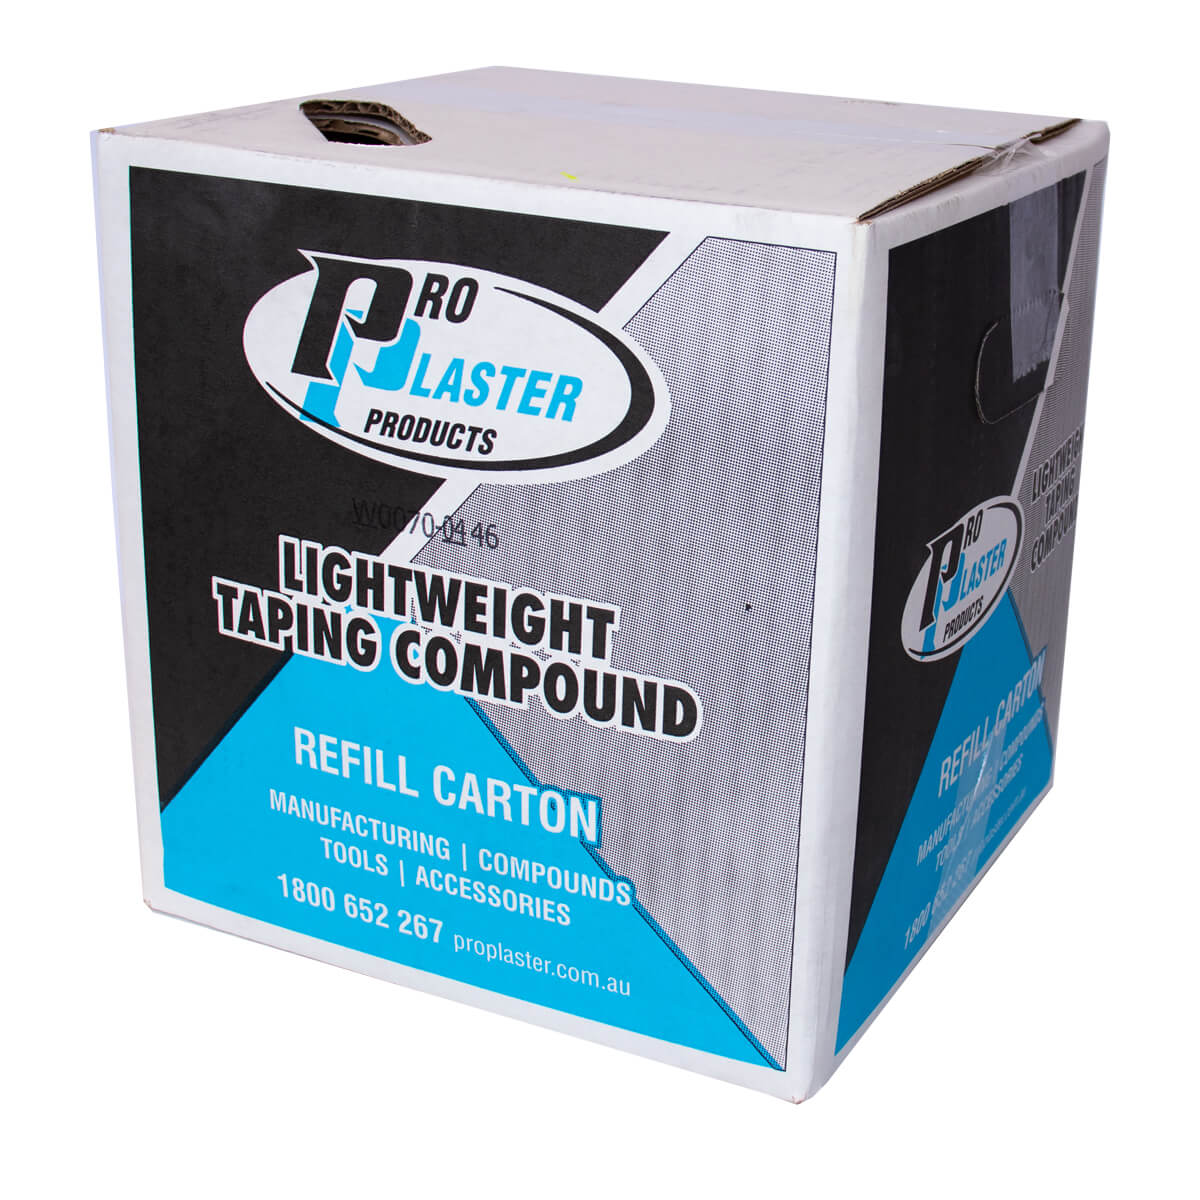 Taping Compound LW Carton 13.8Ltr White